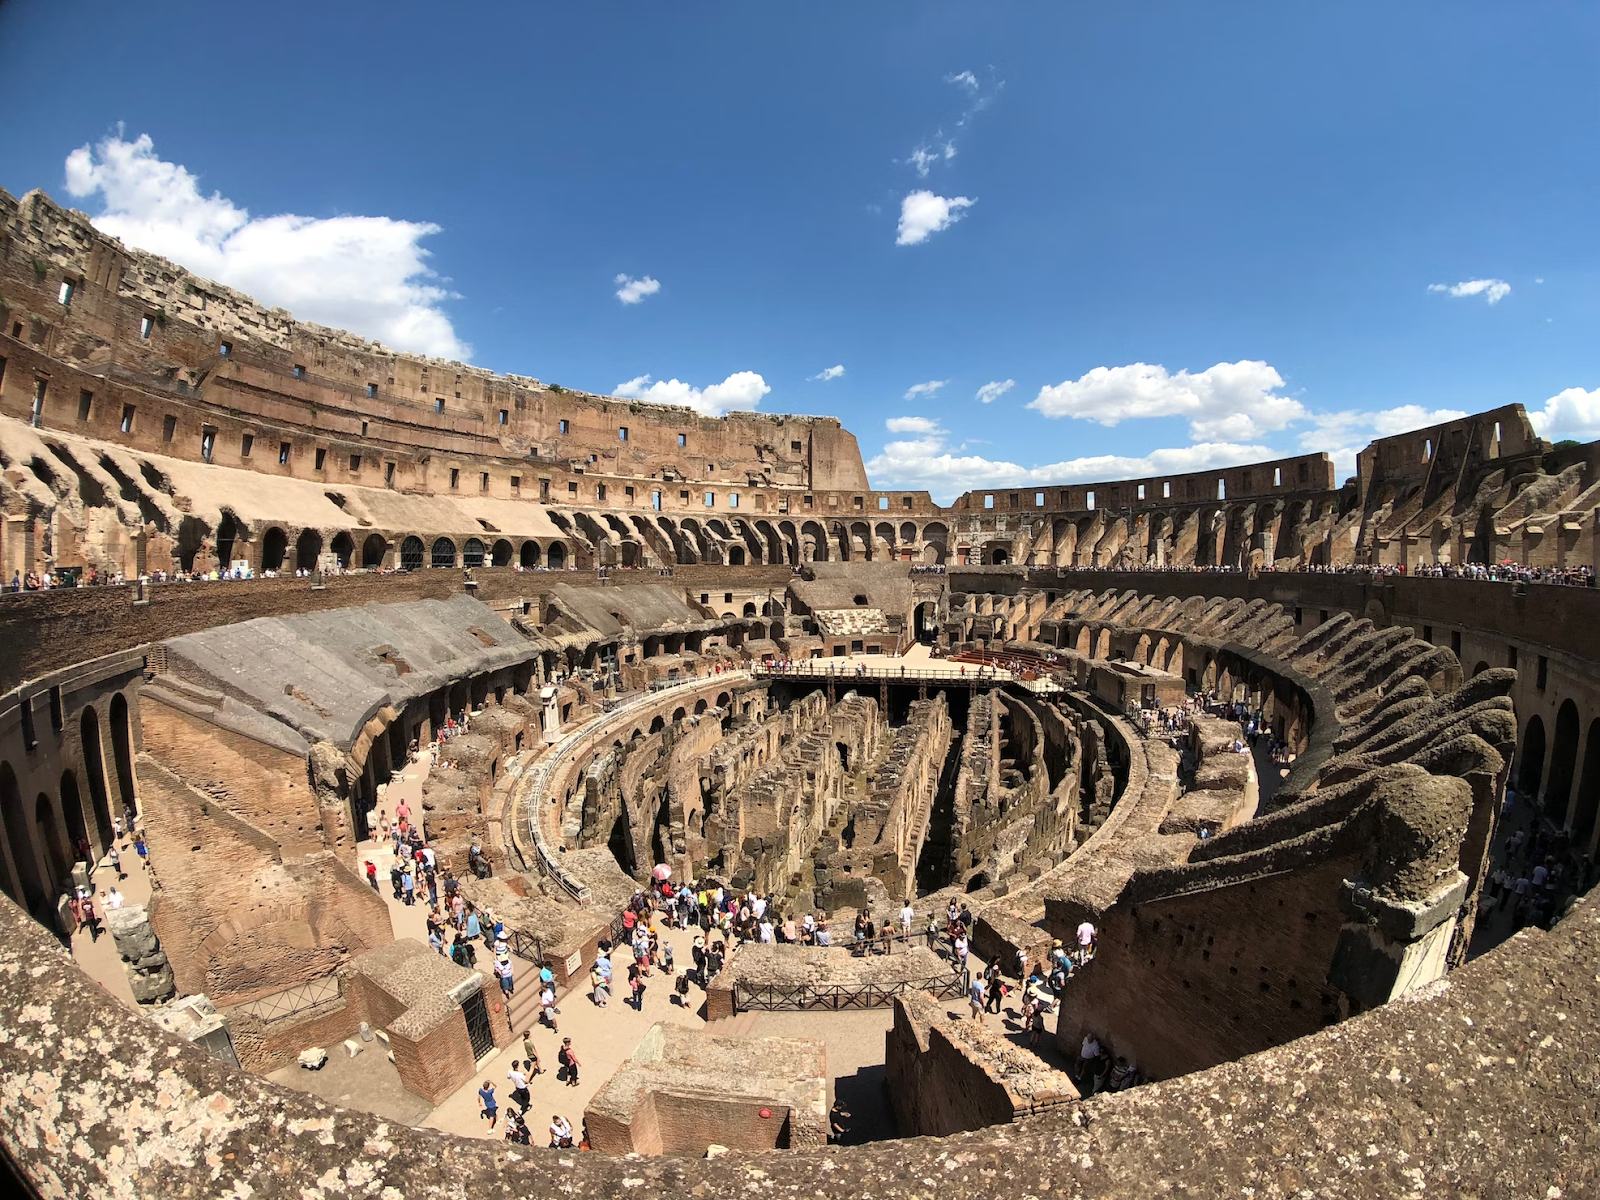 Inside the Colosseum: What to Expect